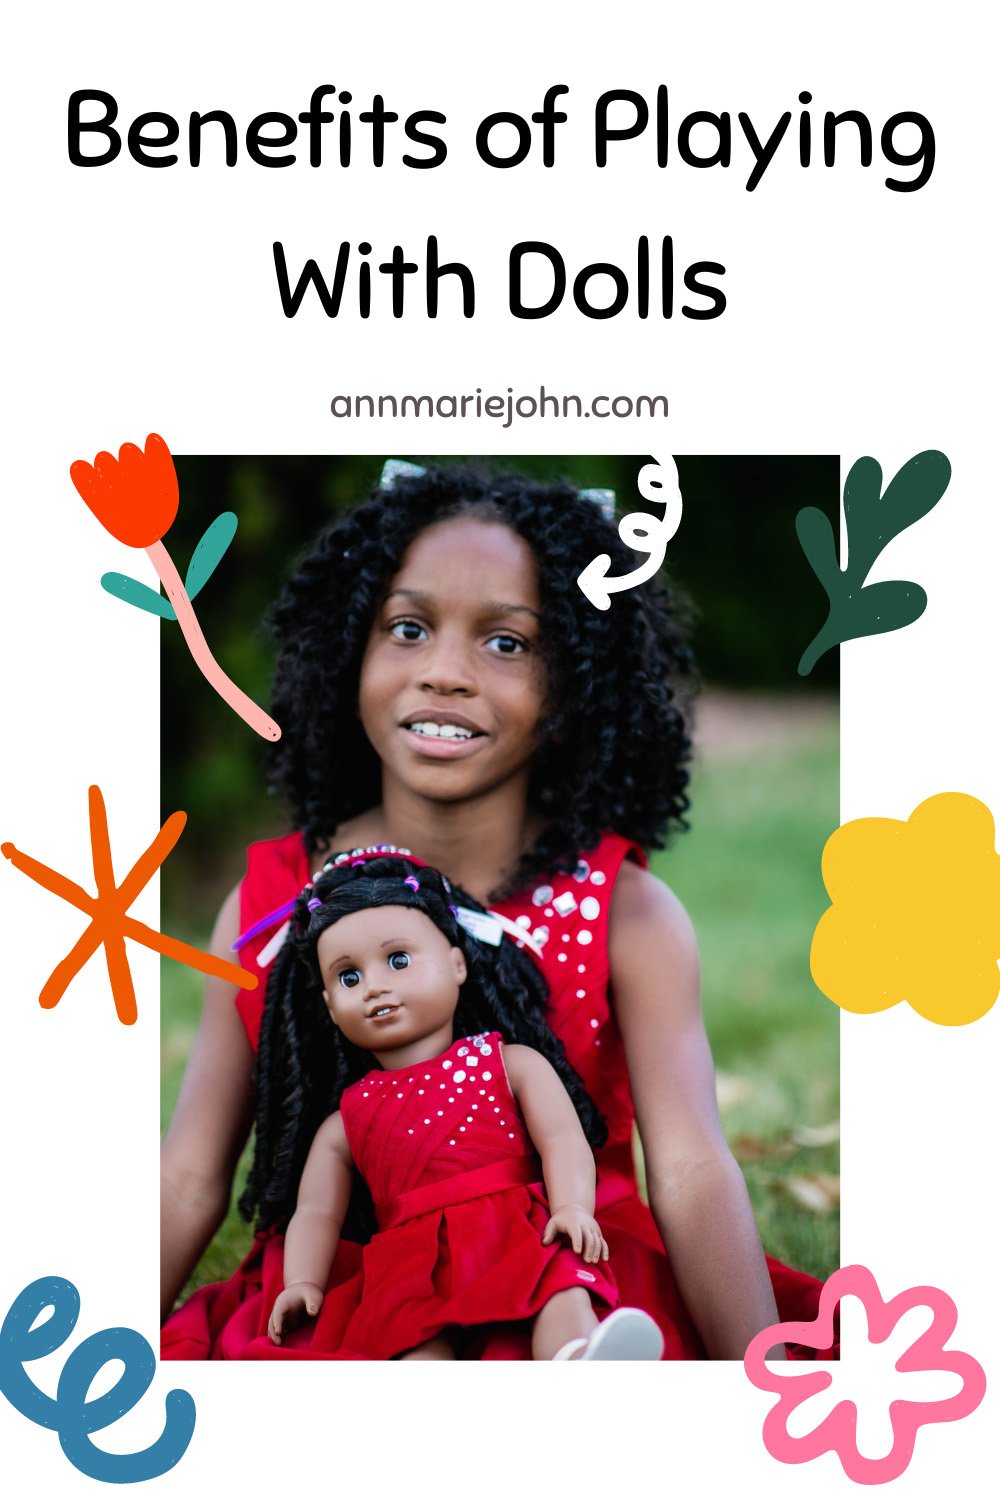 Benefits of Playing with Dolls